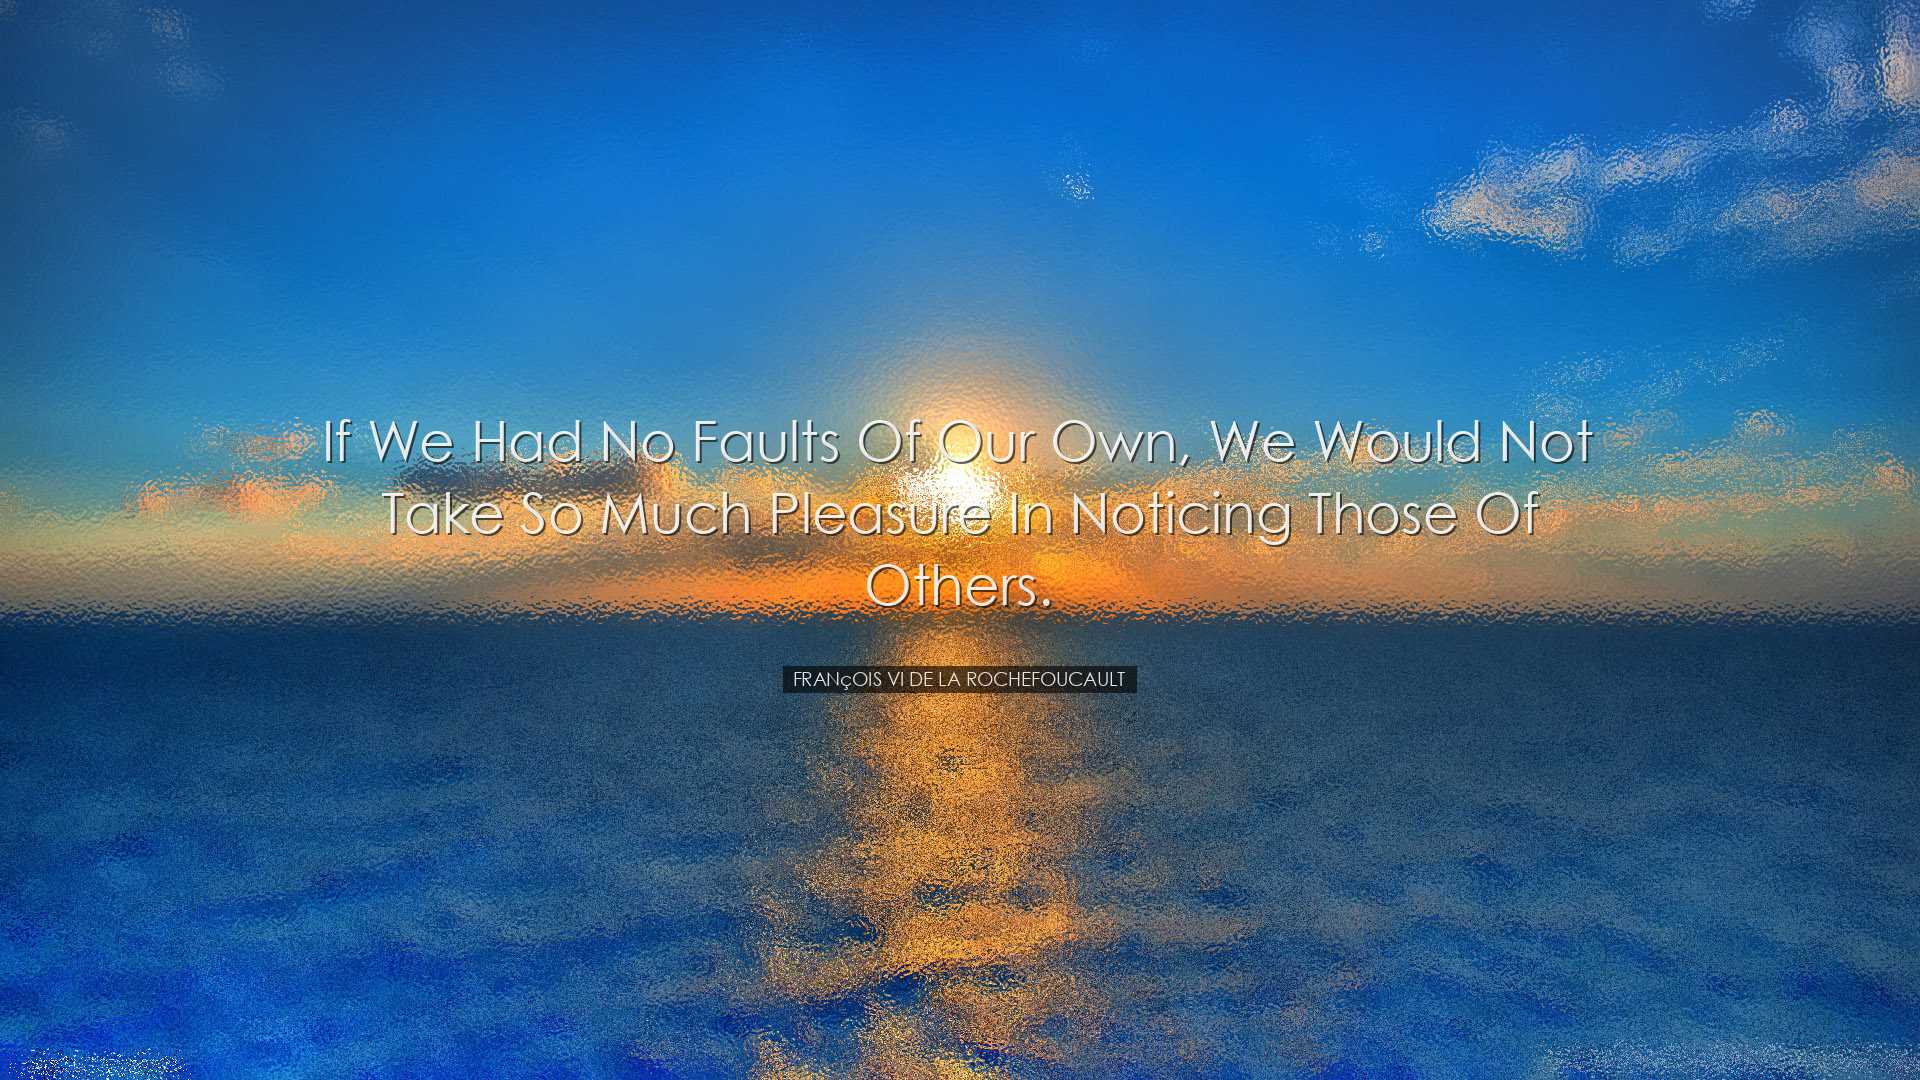 If we had no faults of our own, we would not take so much pleasure